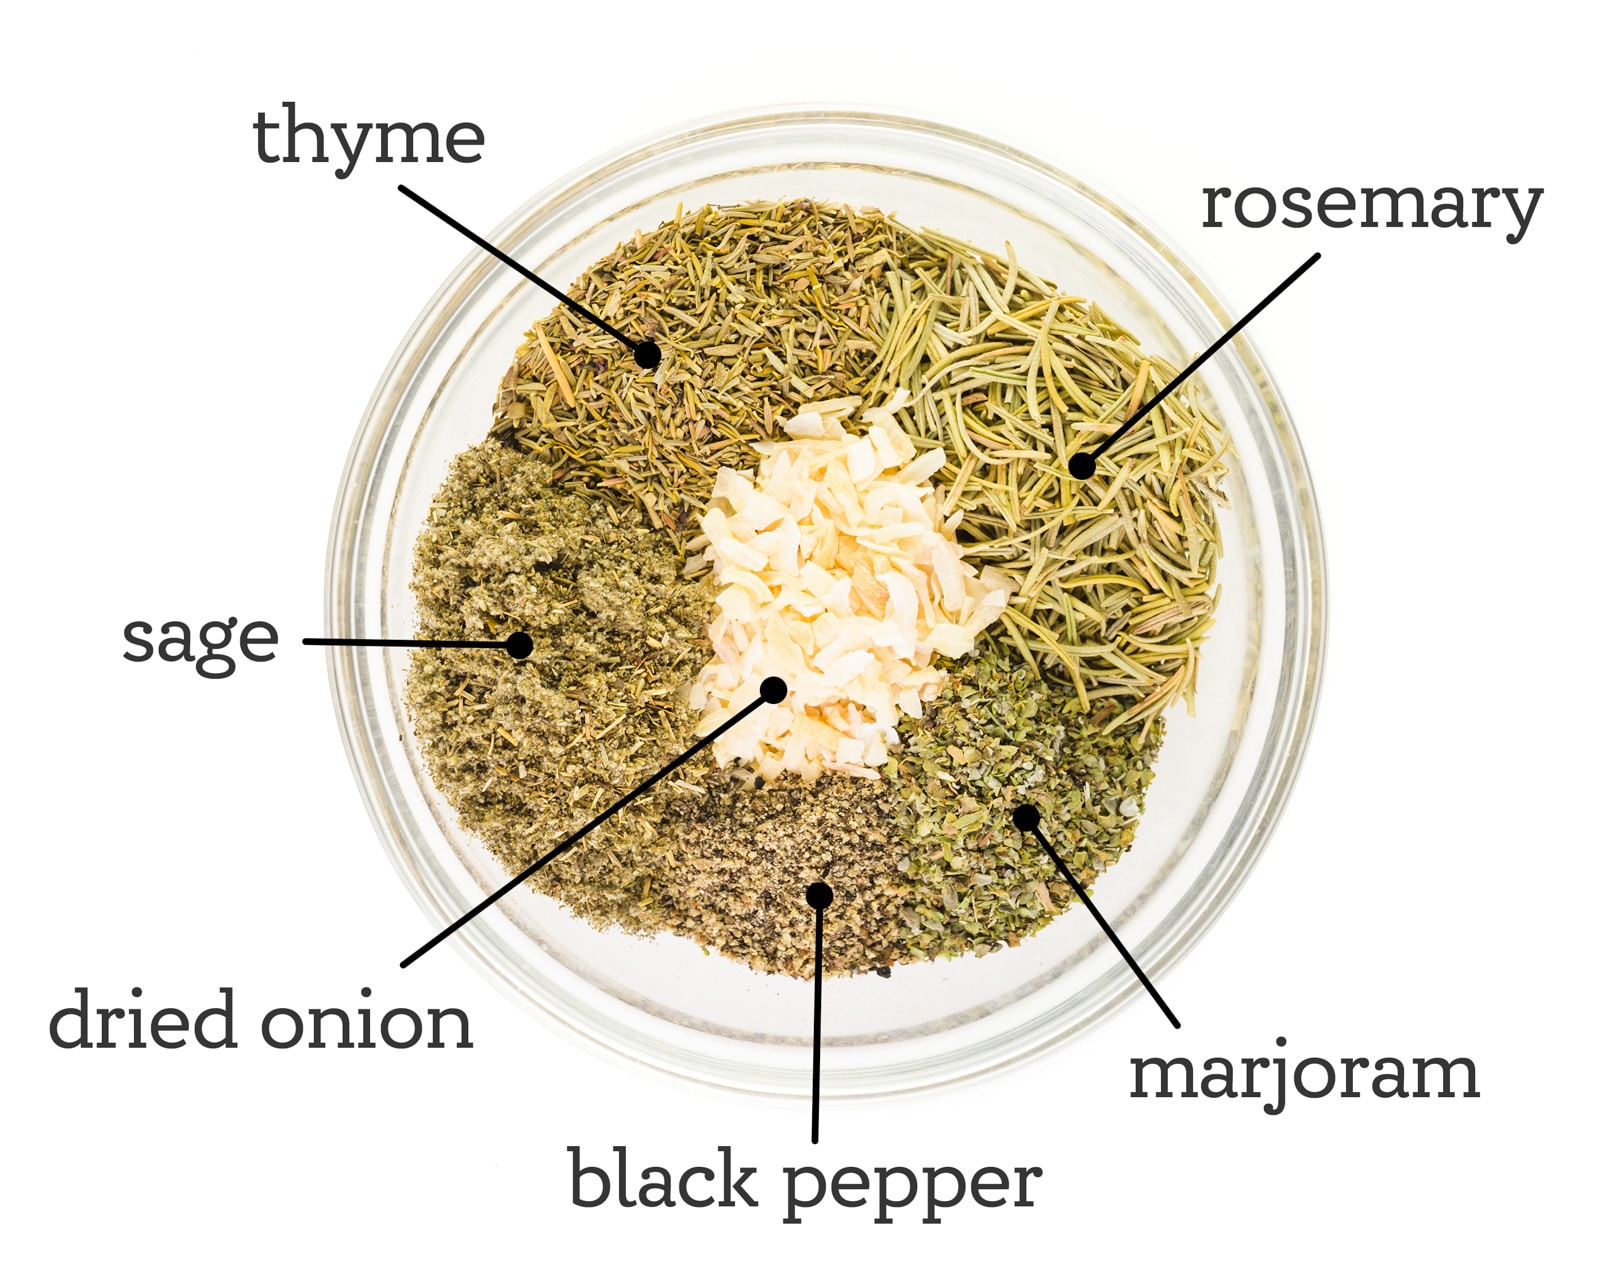 The spices in poultry seasoning are in a bowl. The labels pointing to the herbs read, "Rosemary, Marjoram, Black Pepper, Dried Onions, Sage, and Thyme."